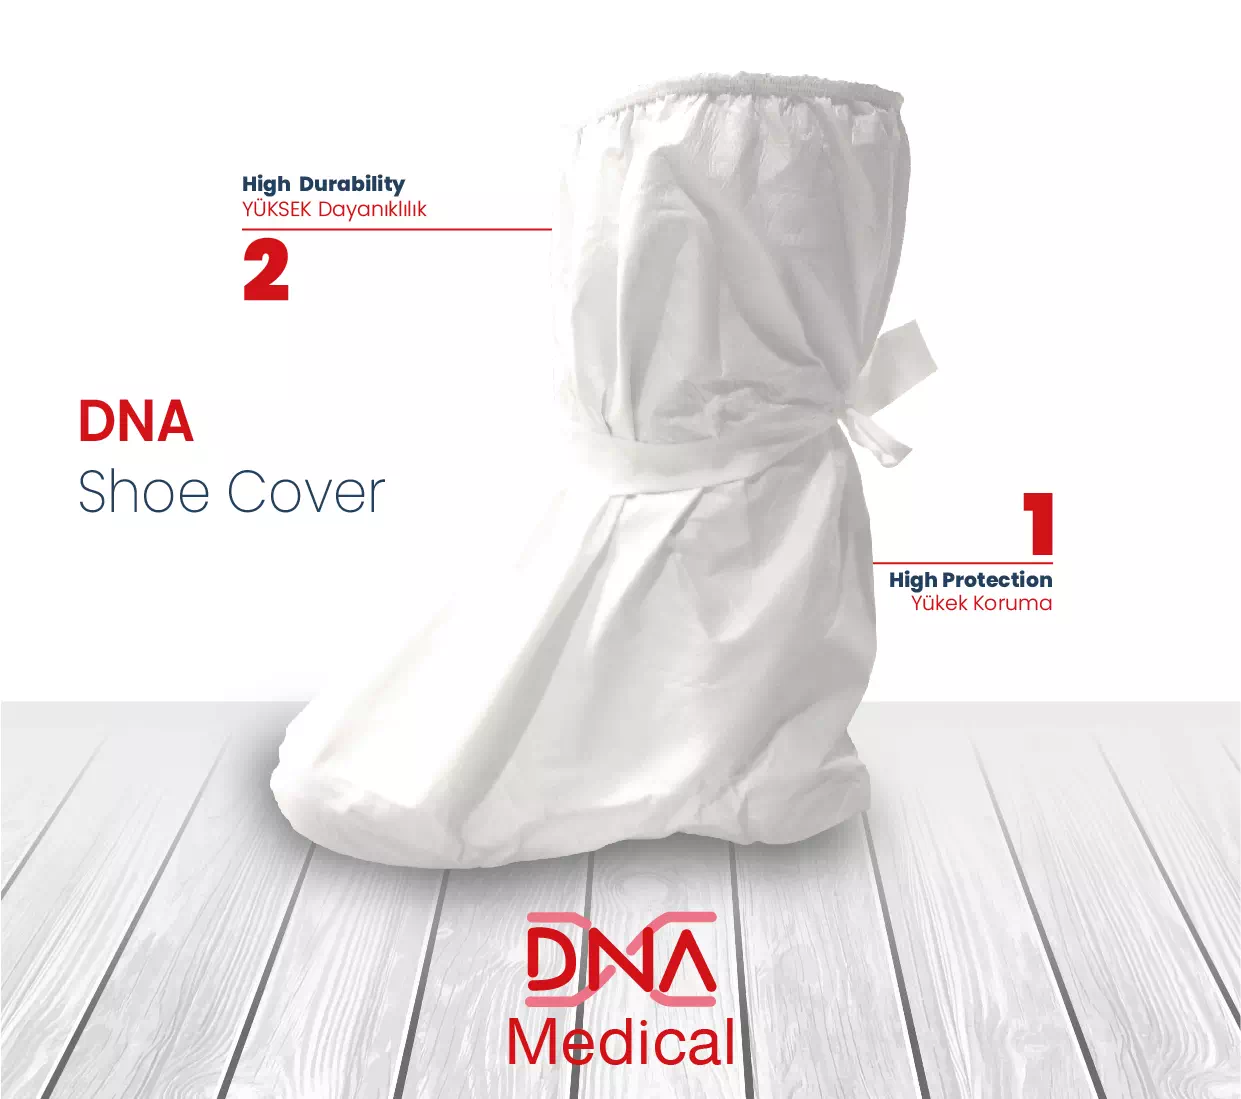 DNA – Shoe Cover